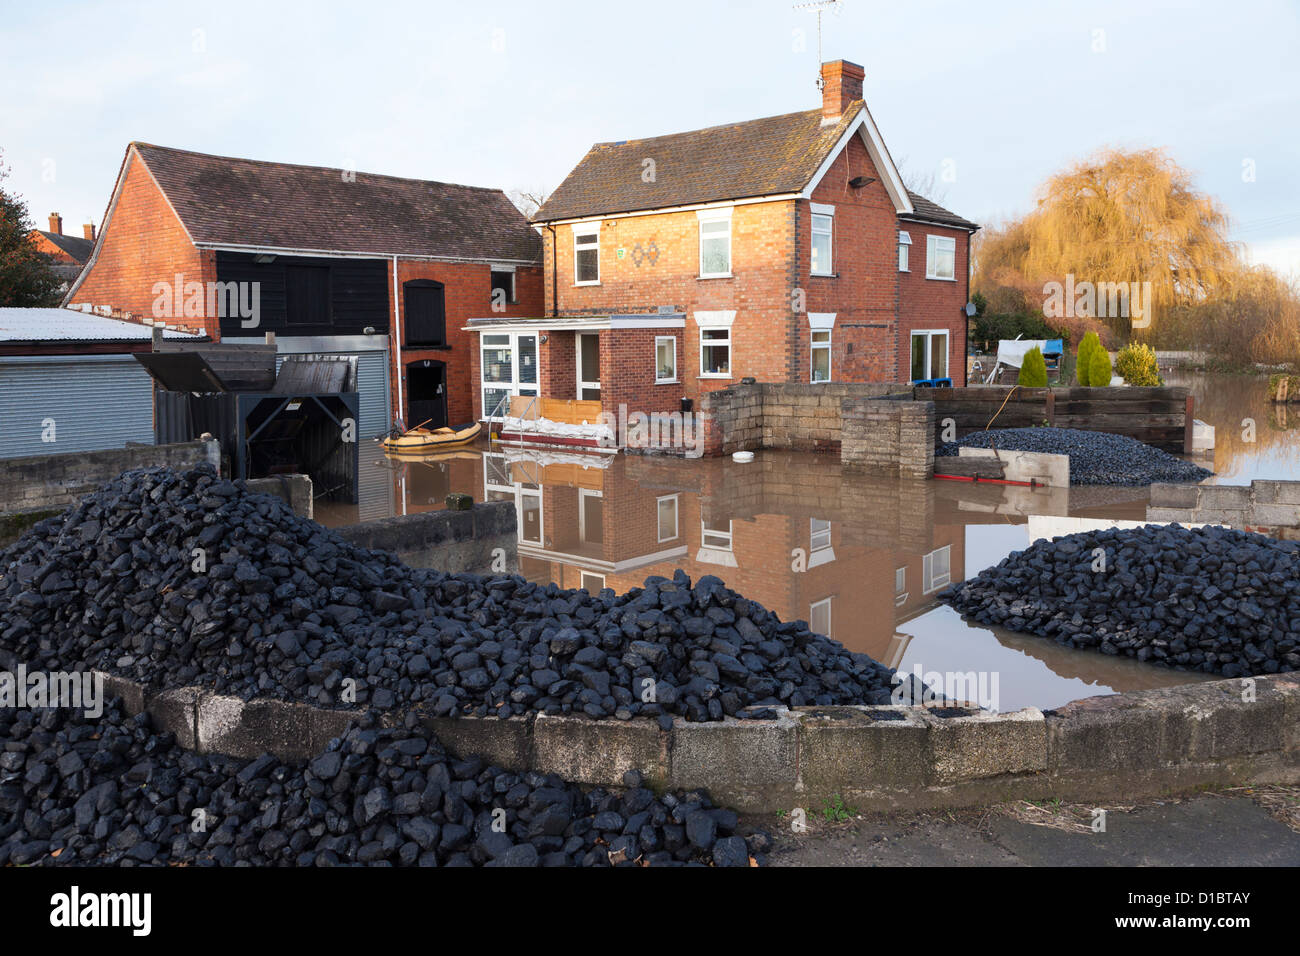 Floods by the River Severn - 29th November 2012 - local coal yard by the River Severn flooded at Maisemore, Gloucestershire, UK Stock Photo